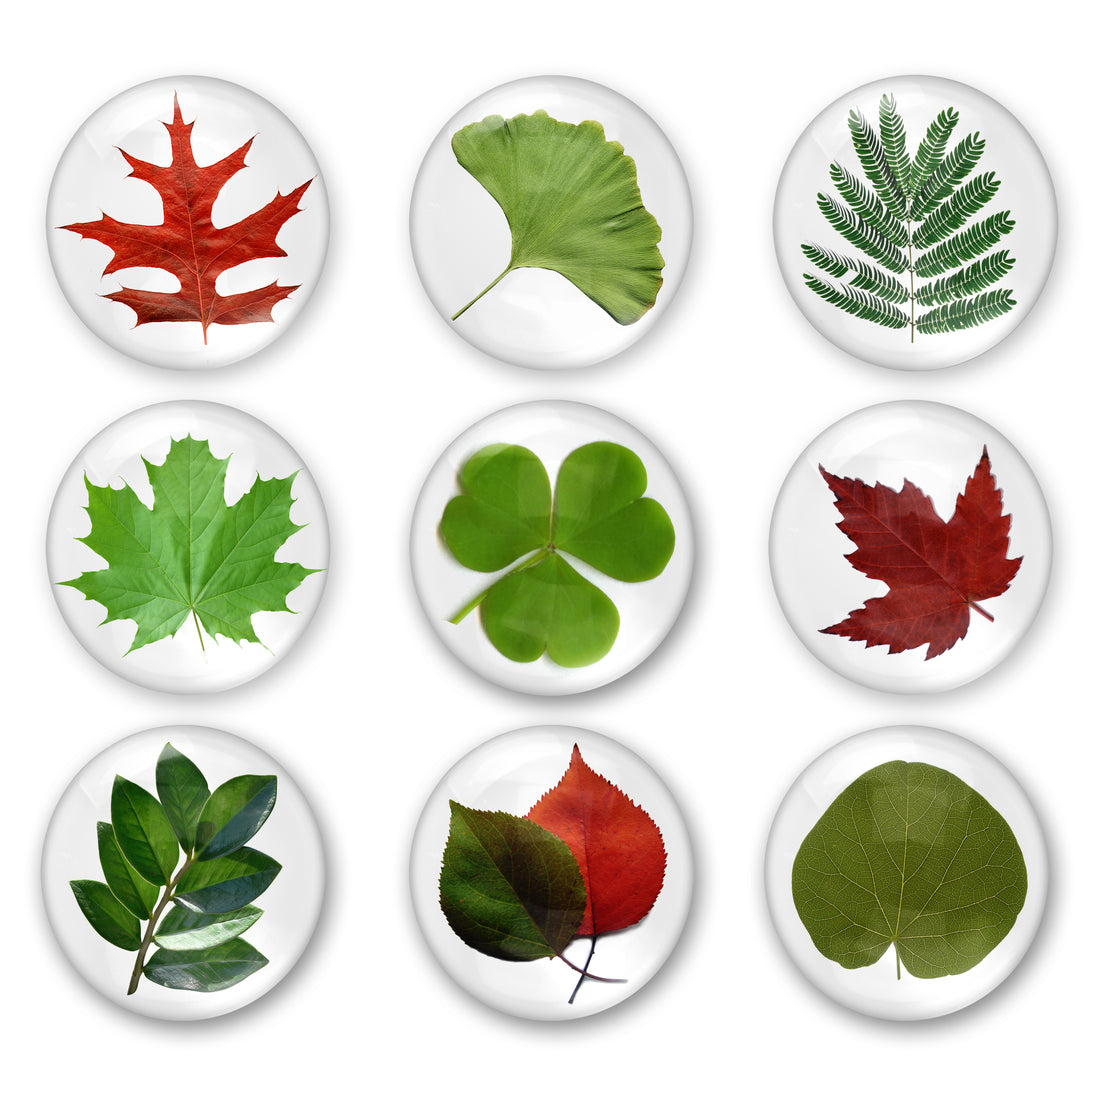 Cabochon Collage Sheet - Leaves - Printable round image in 7 sizes